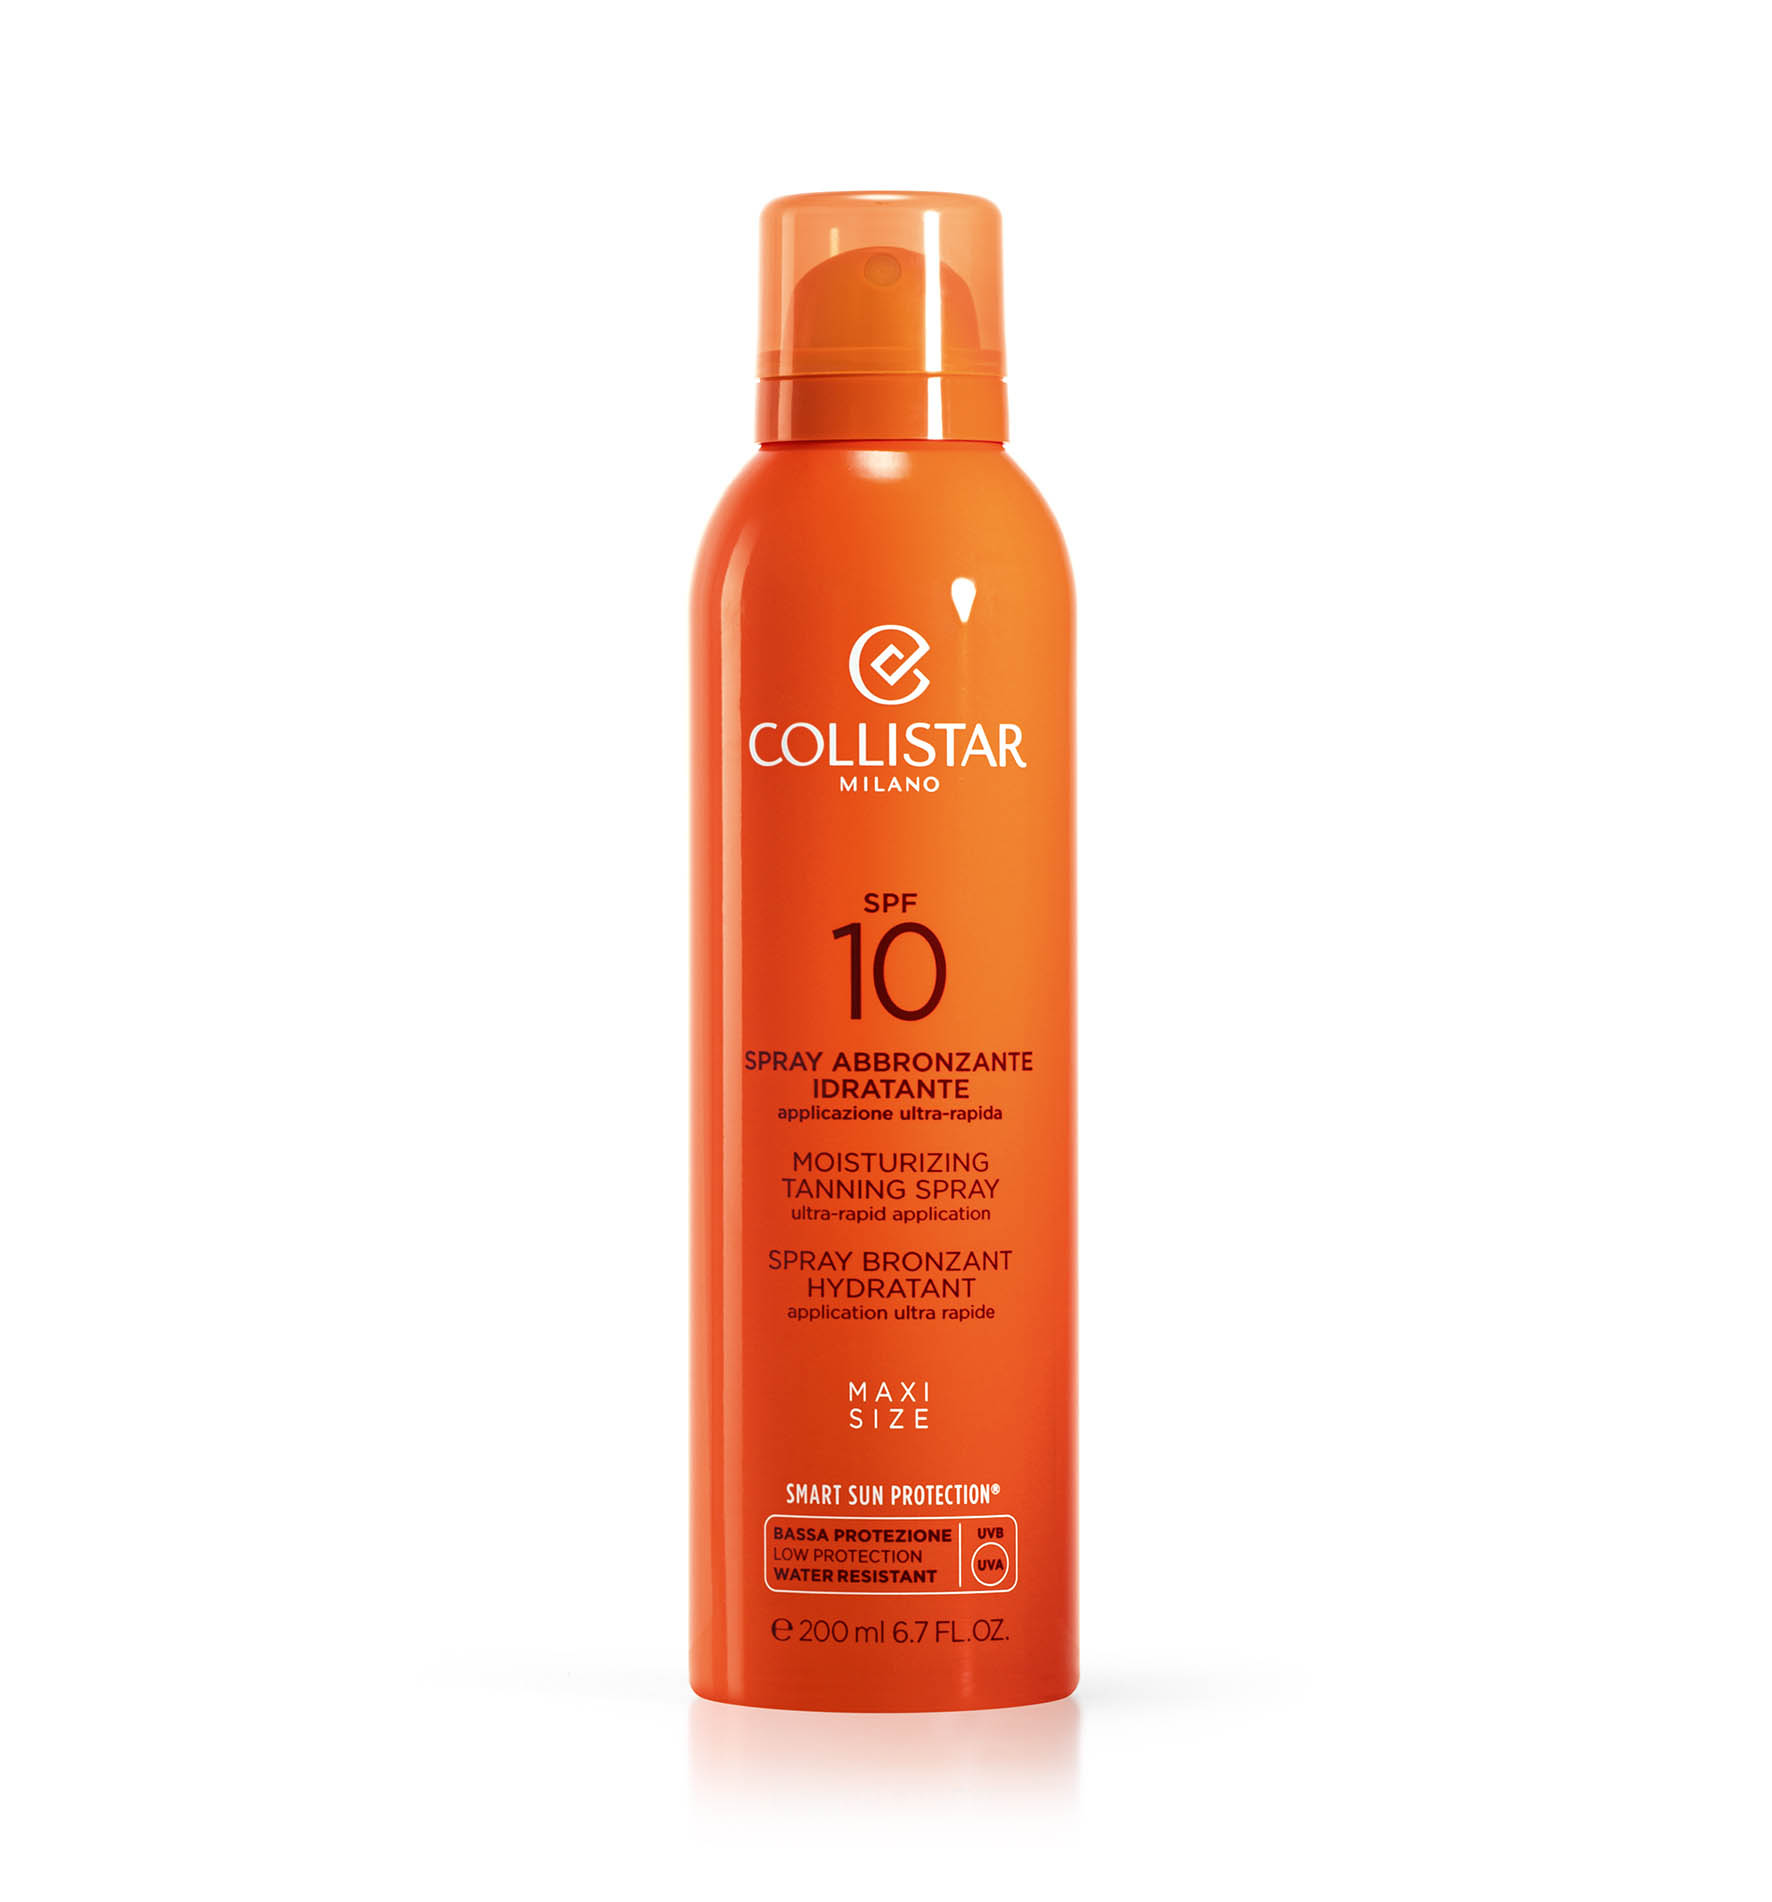 MOISTURIZING TANNING SPRAY SPF 10 - Low Protection SPF 6-10 | Collistar - Shop Online Ufficiale